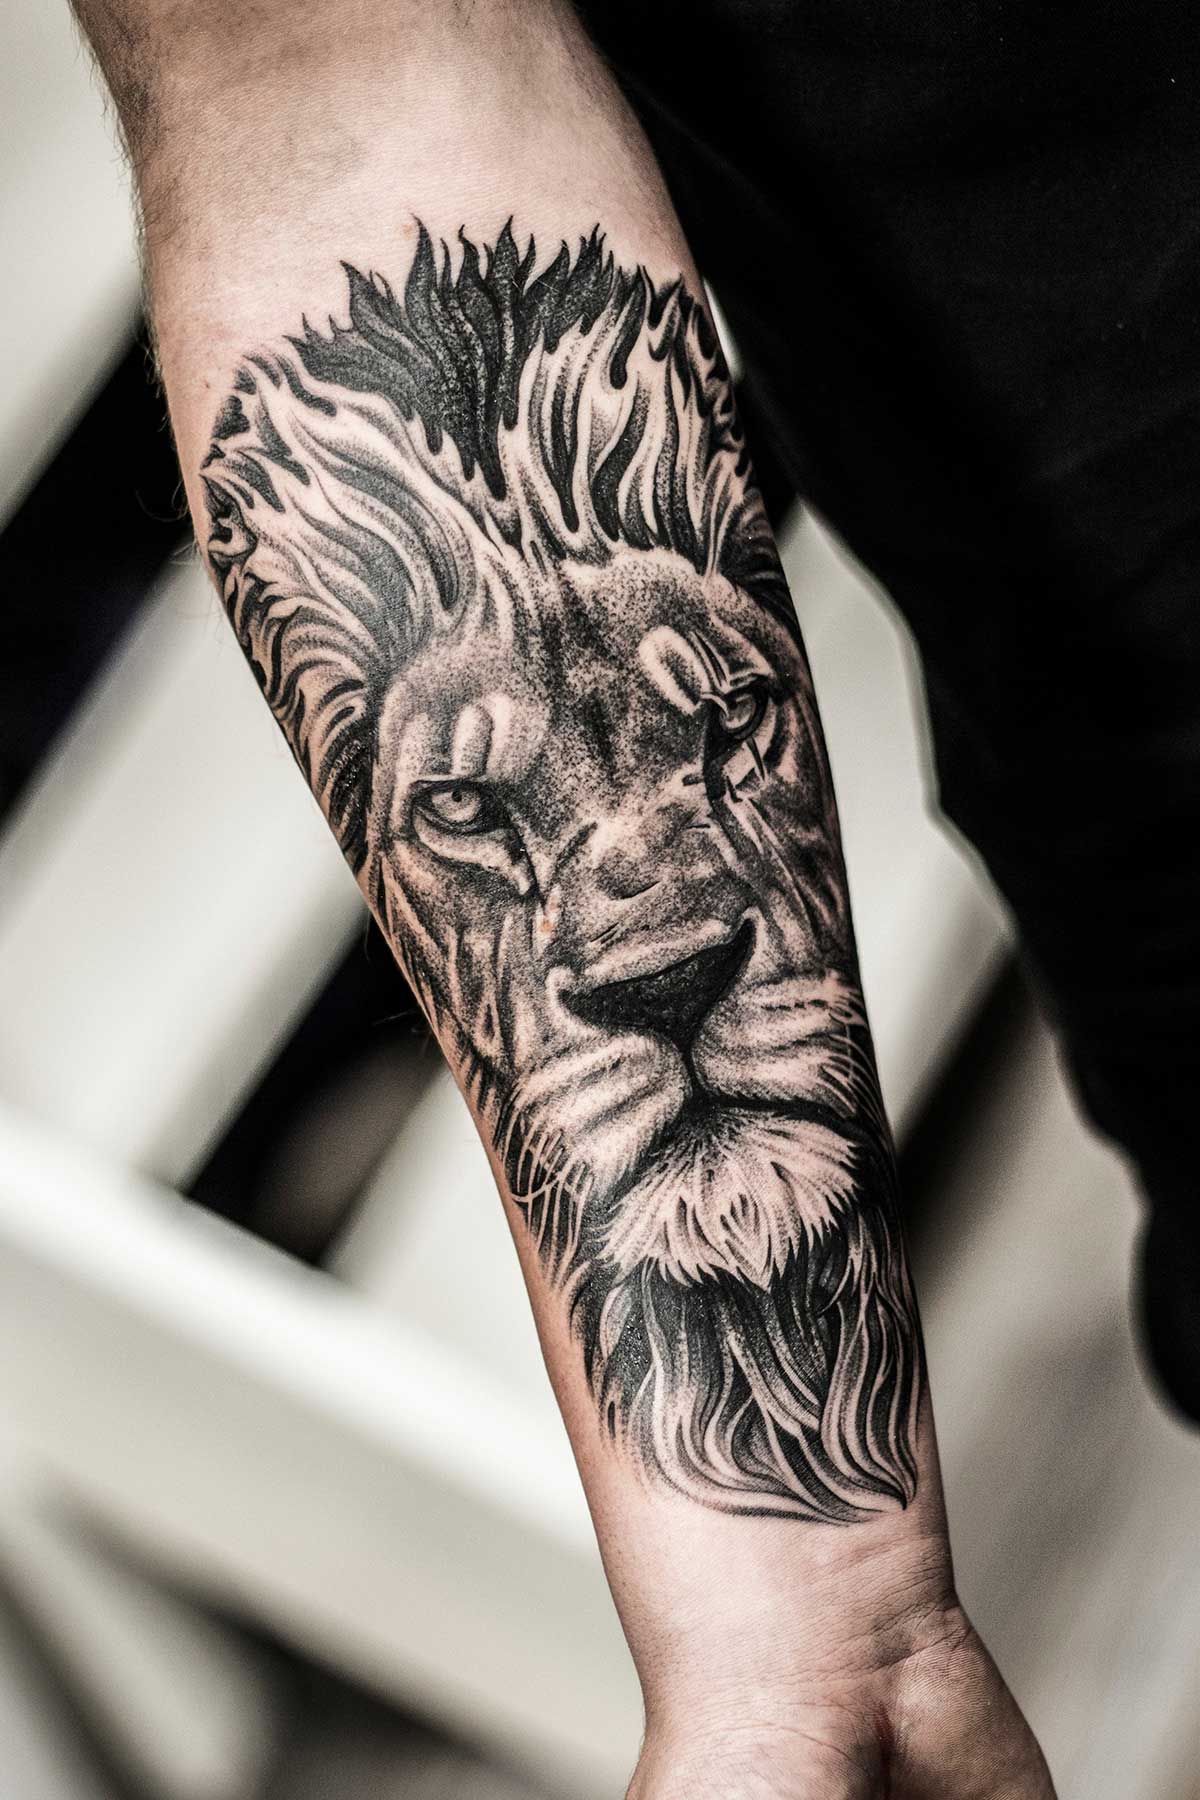 47 Amazing and Magnificent Lion Tattoos Ideas and Design for Hand  Psycho  Tats